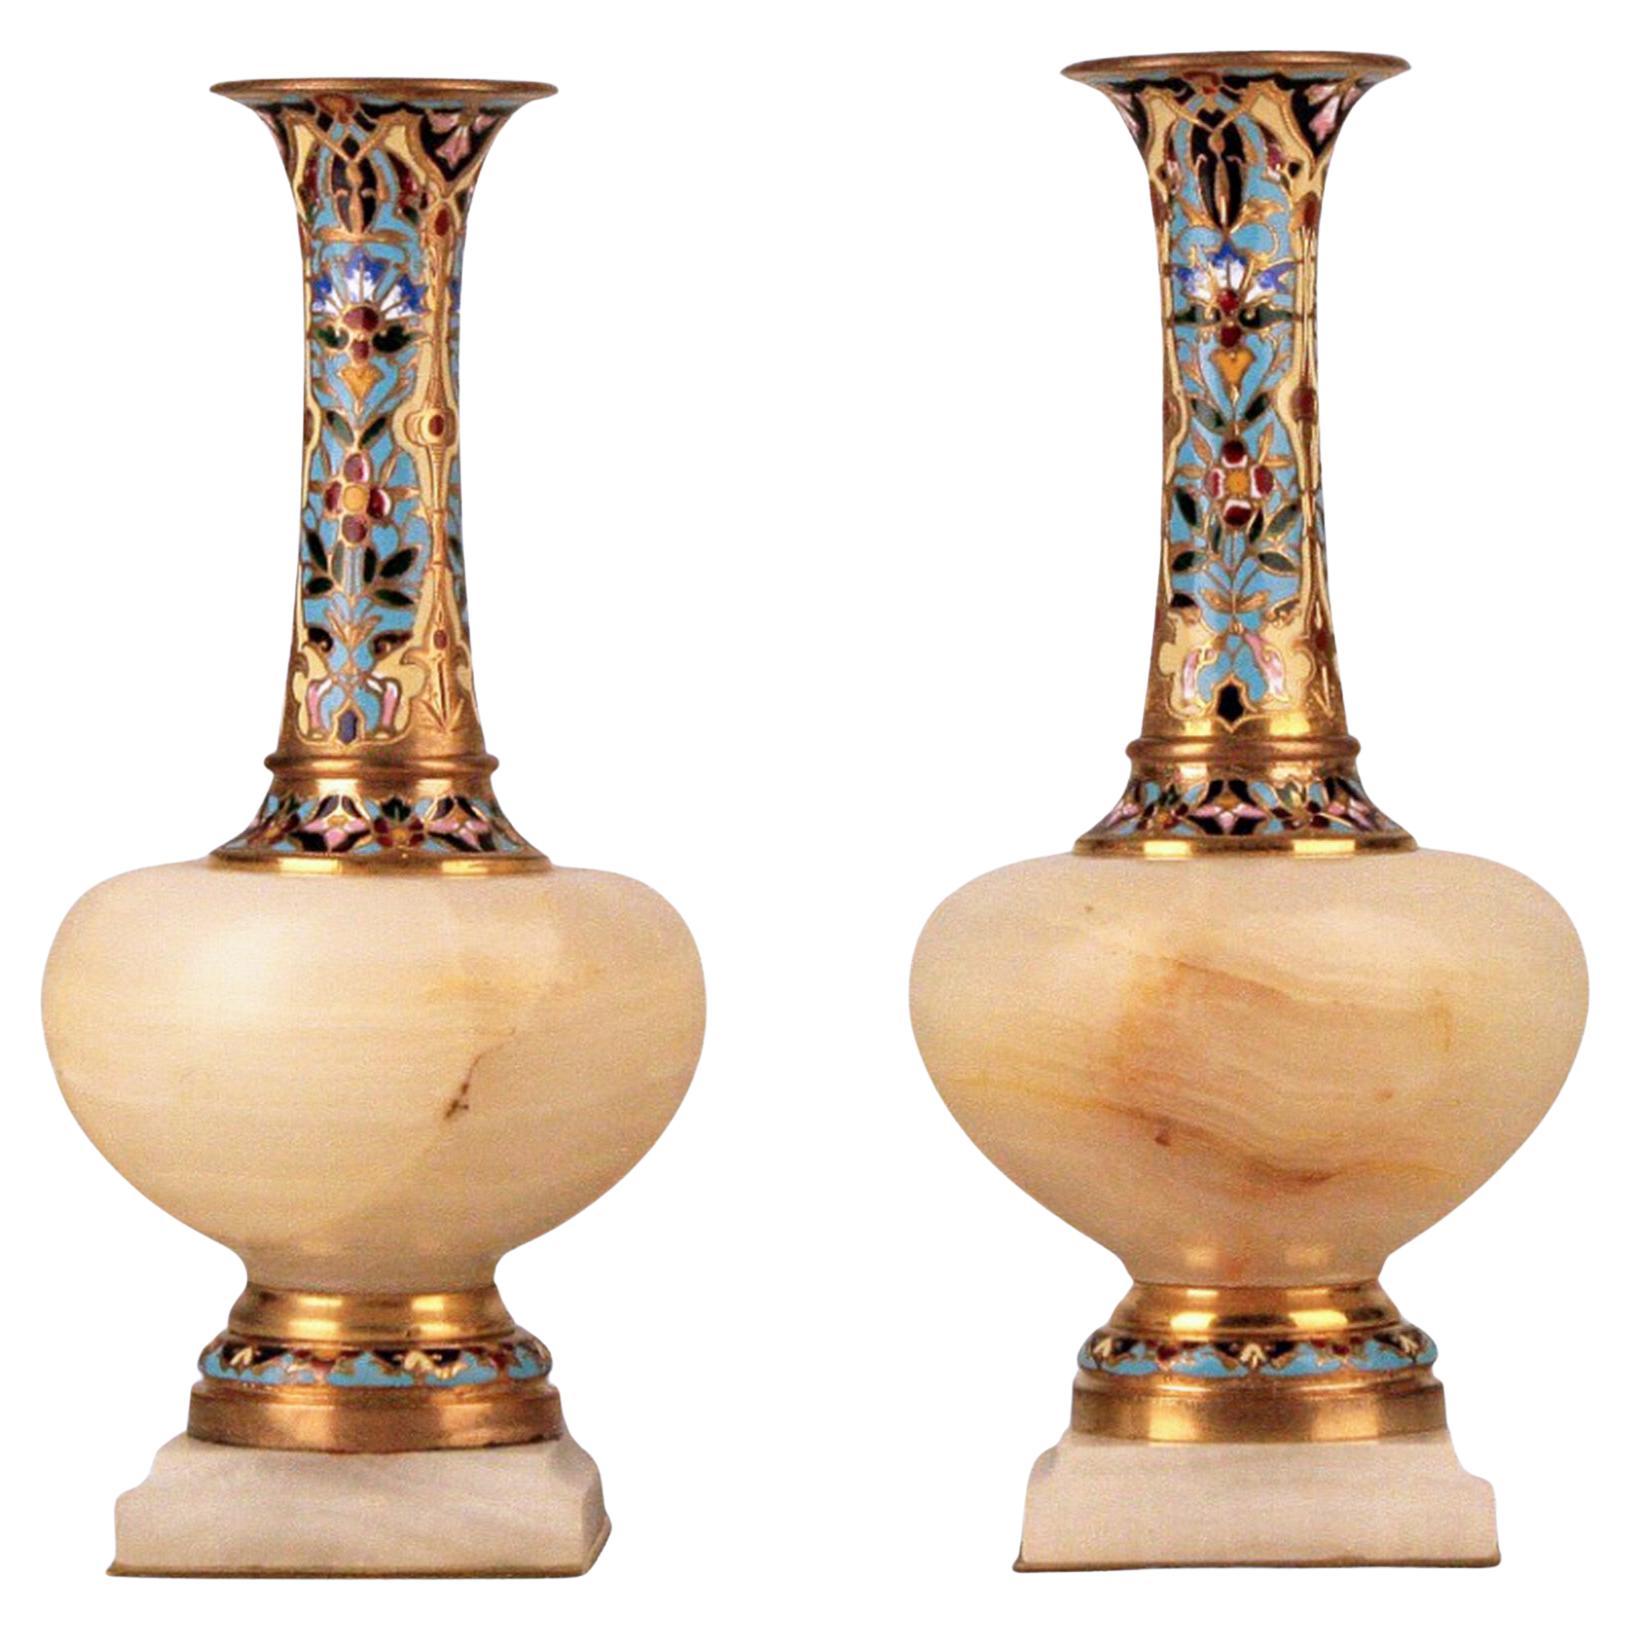 Pair of 19th Century Neoclassical Bronce and Onyx Champlevé Enamel Vases, France